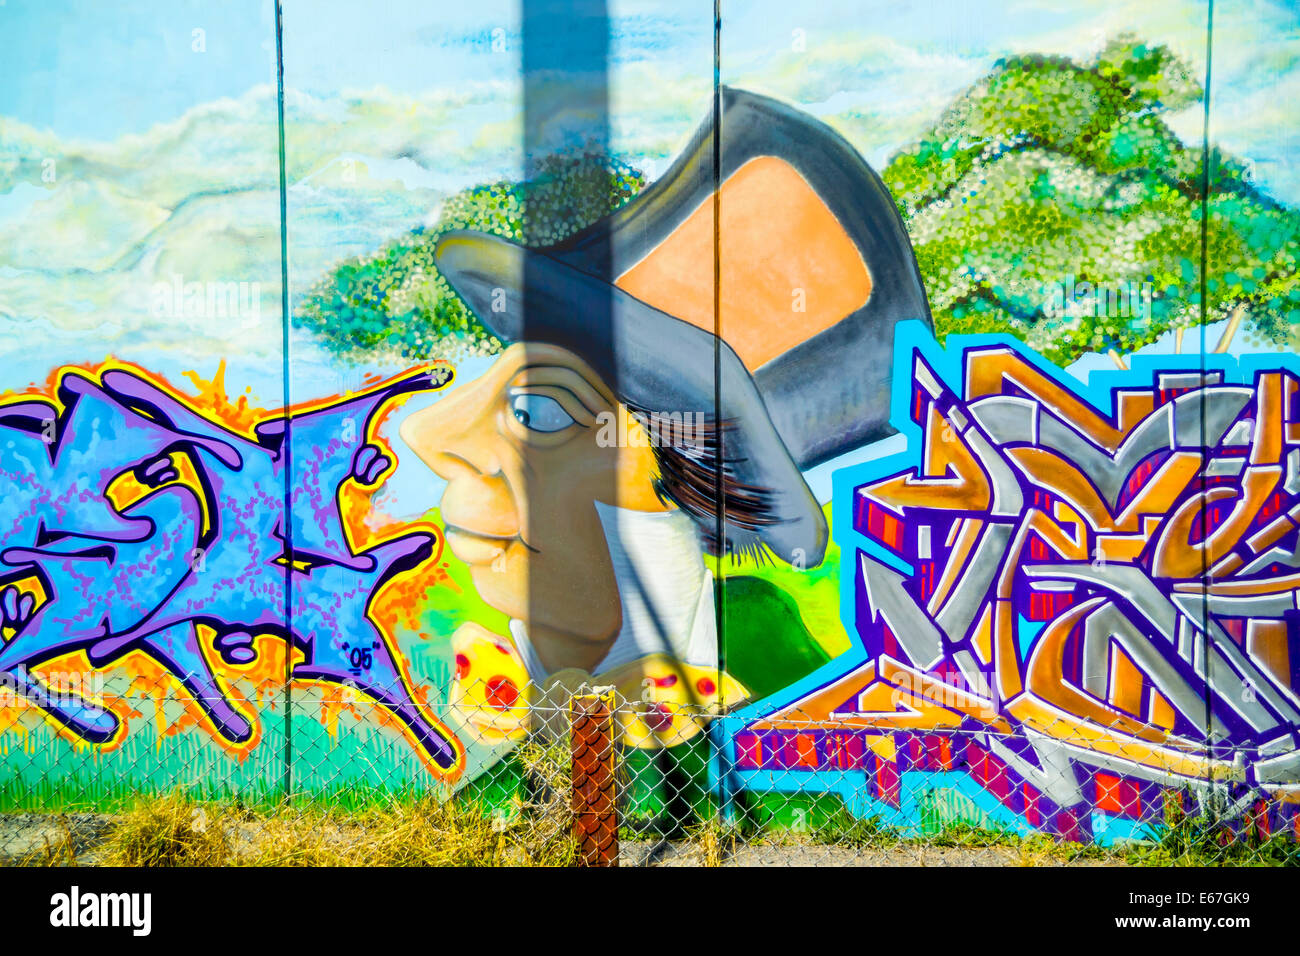 Graffiti on wall in inner city of Melbourne suburb, Richmond Stock Photo